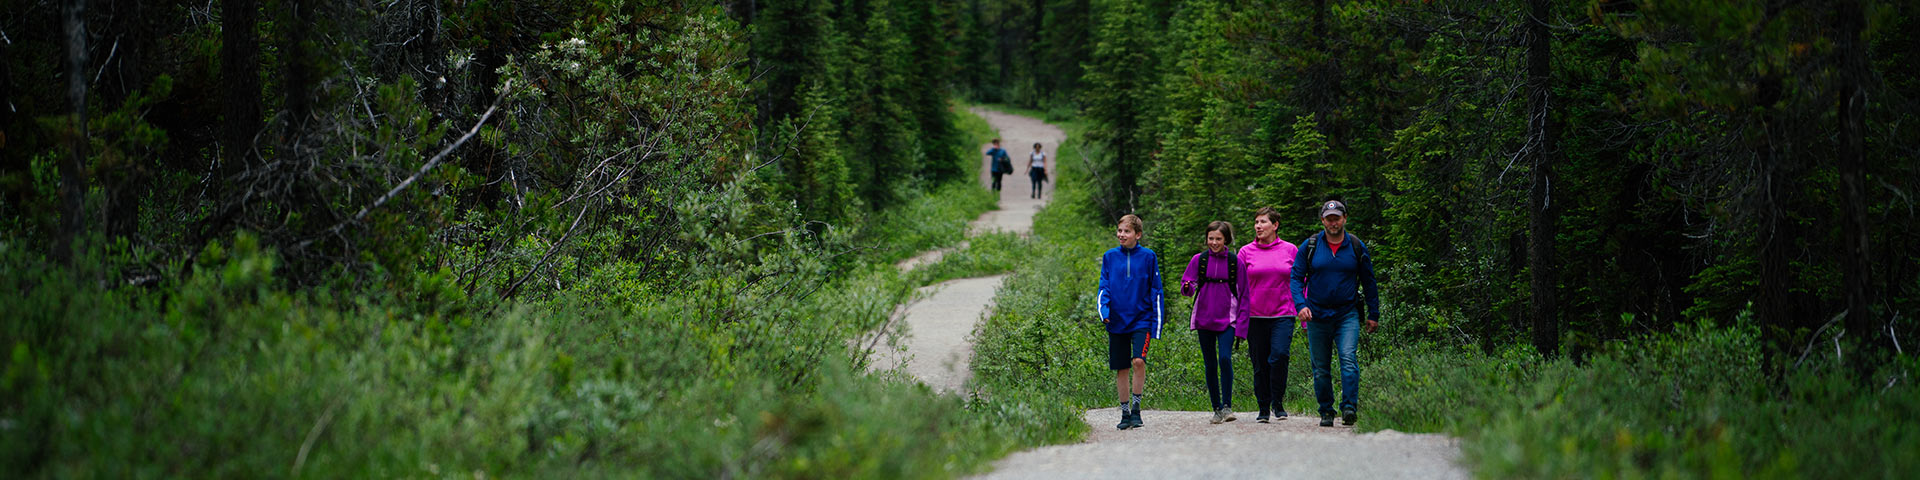 A family walking on a wide trail in a green forest